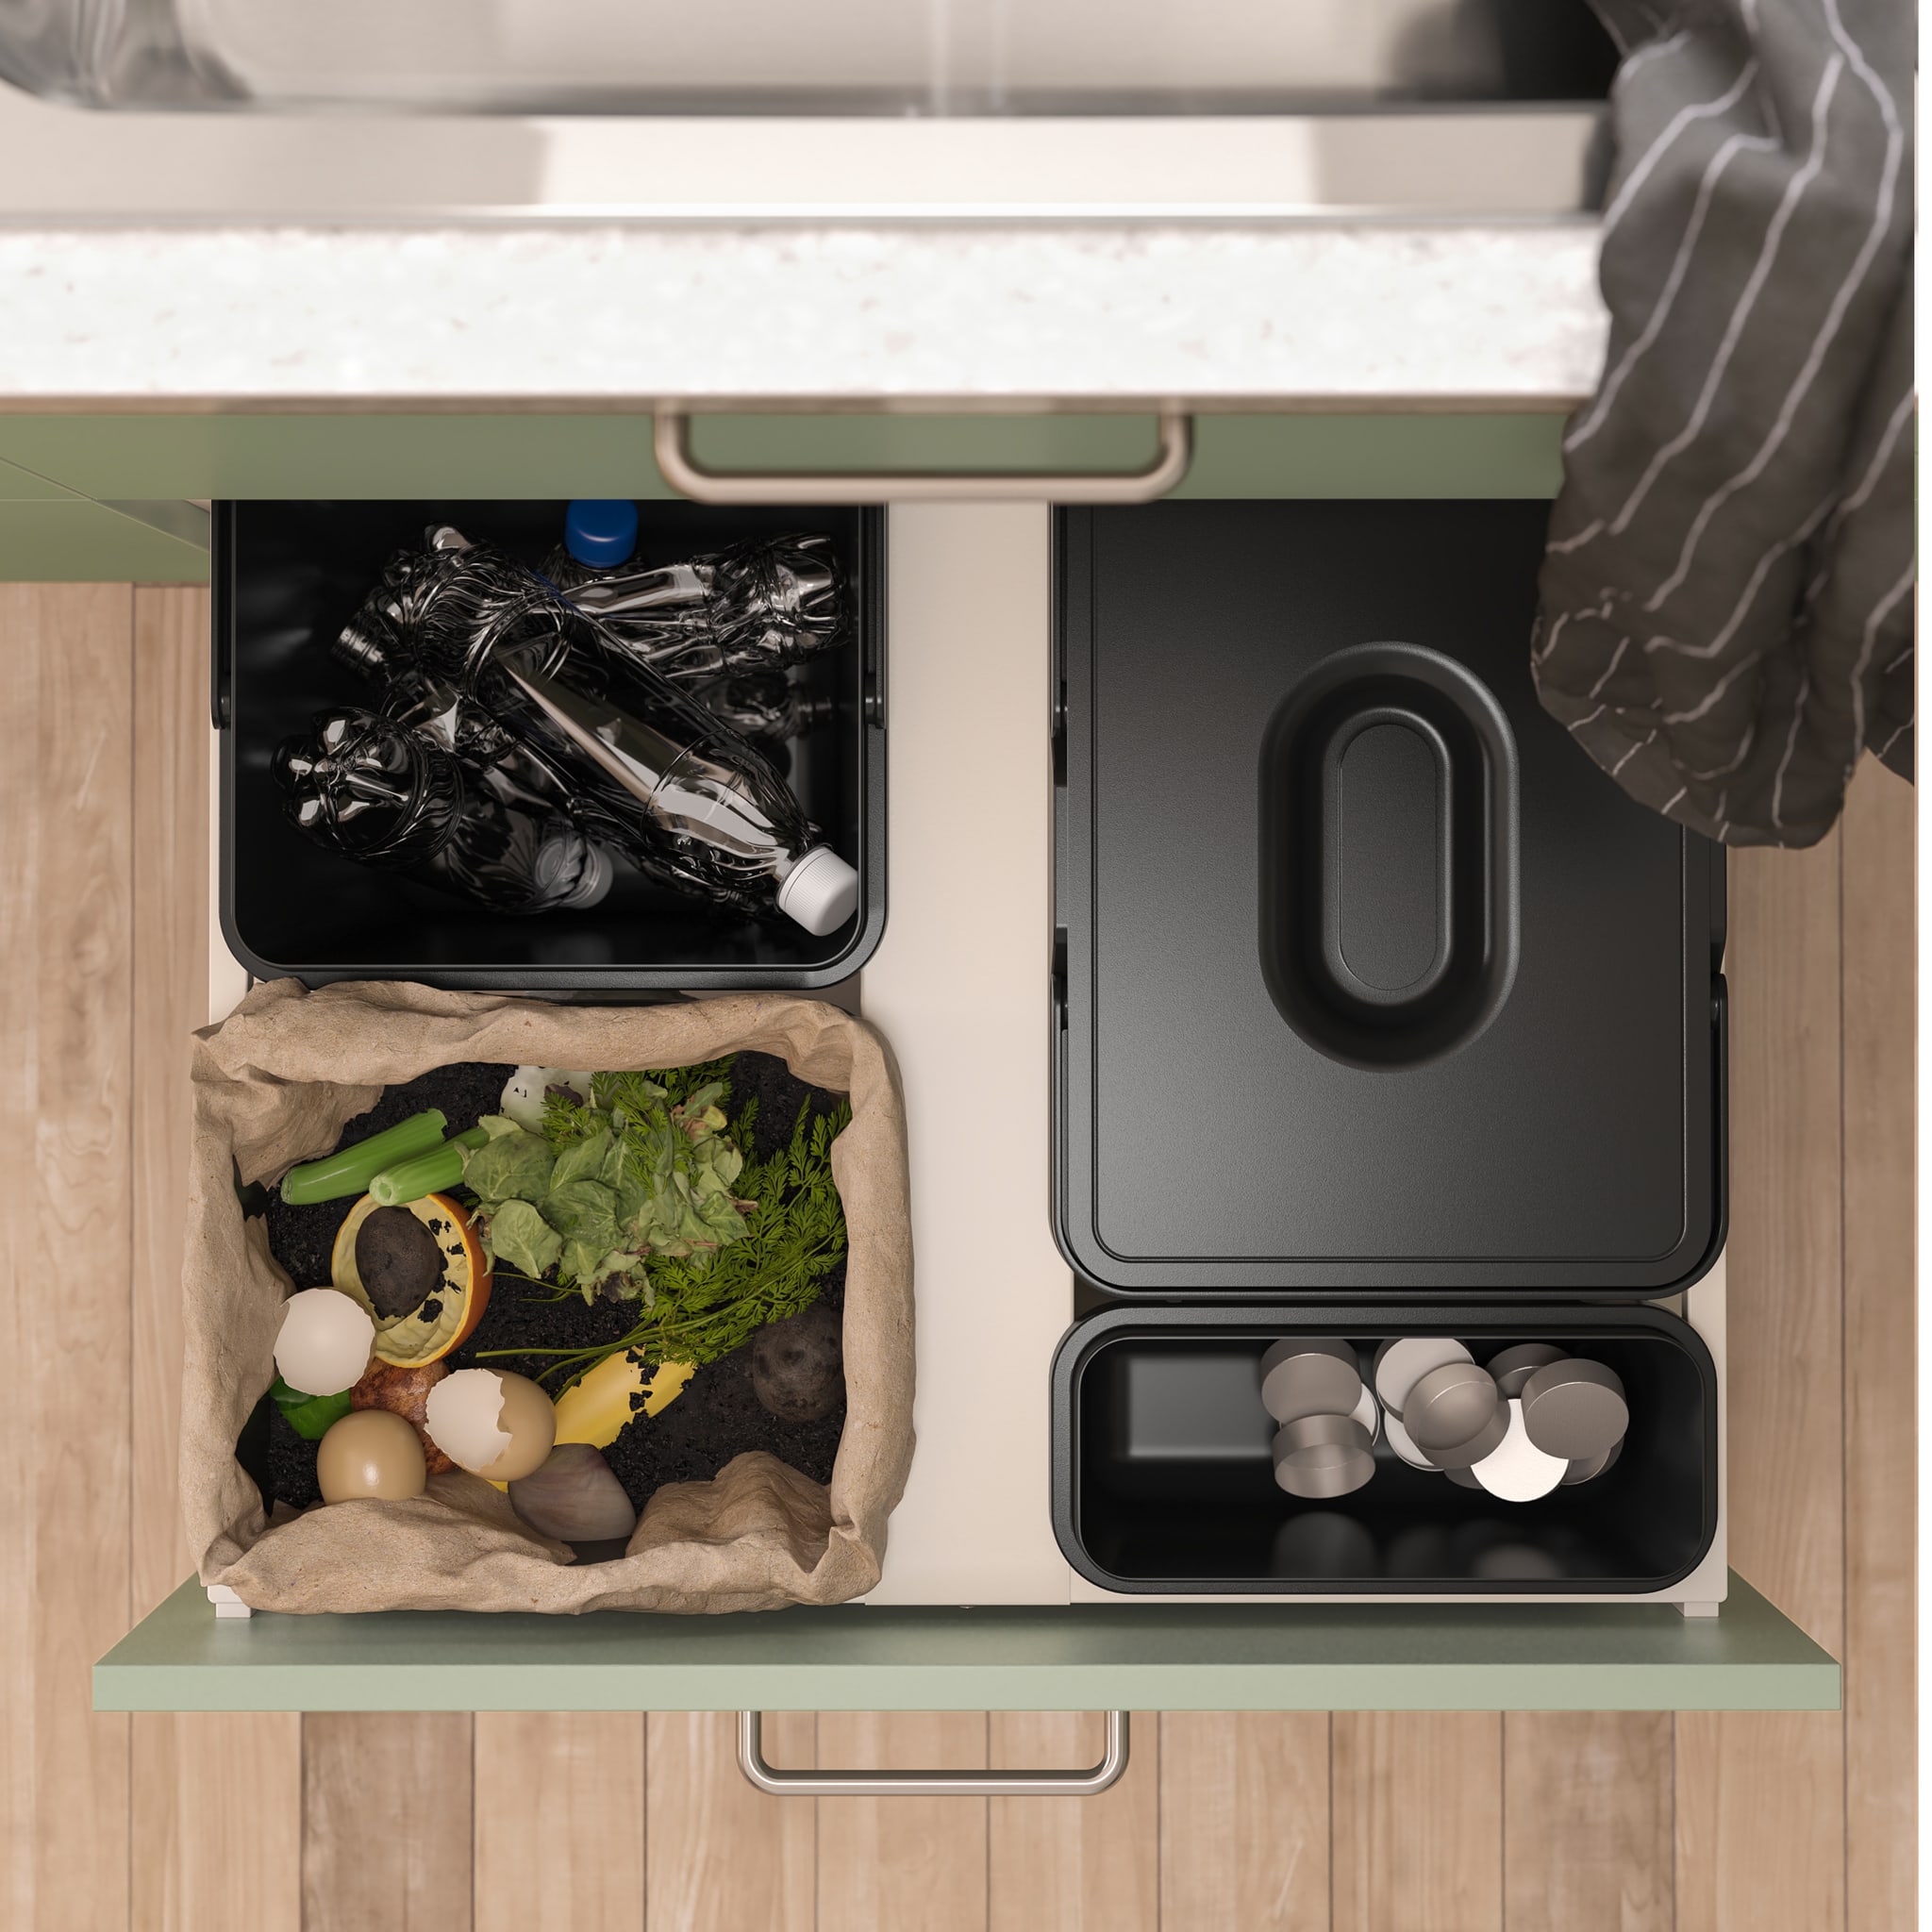  Seen from above is an open kitchen drawer with black waste sorting bins inside. Different kinds of waste is sorted in them.